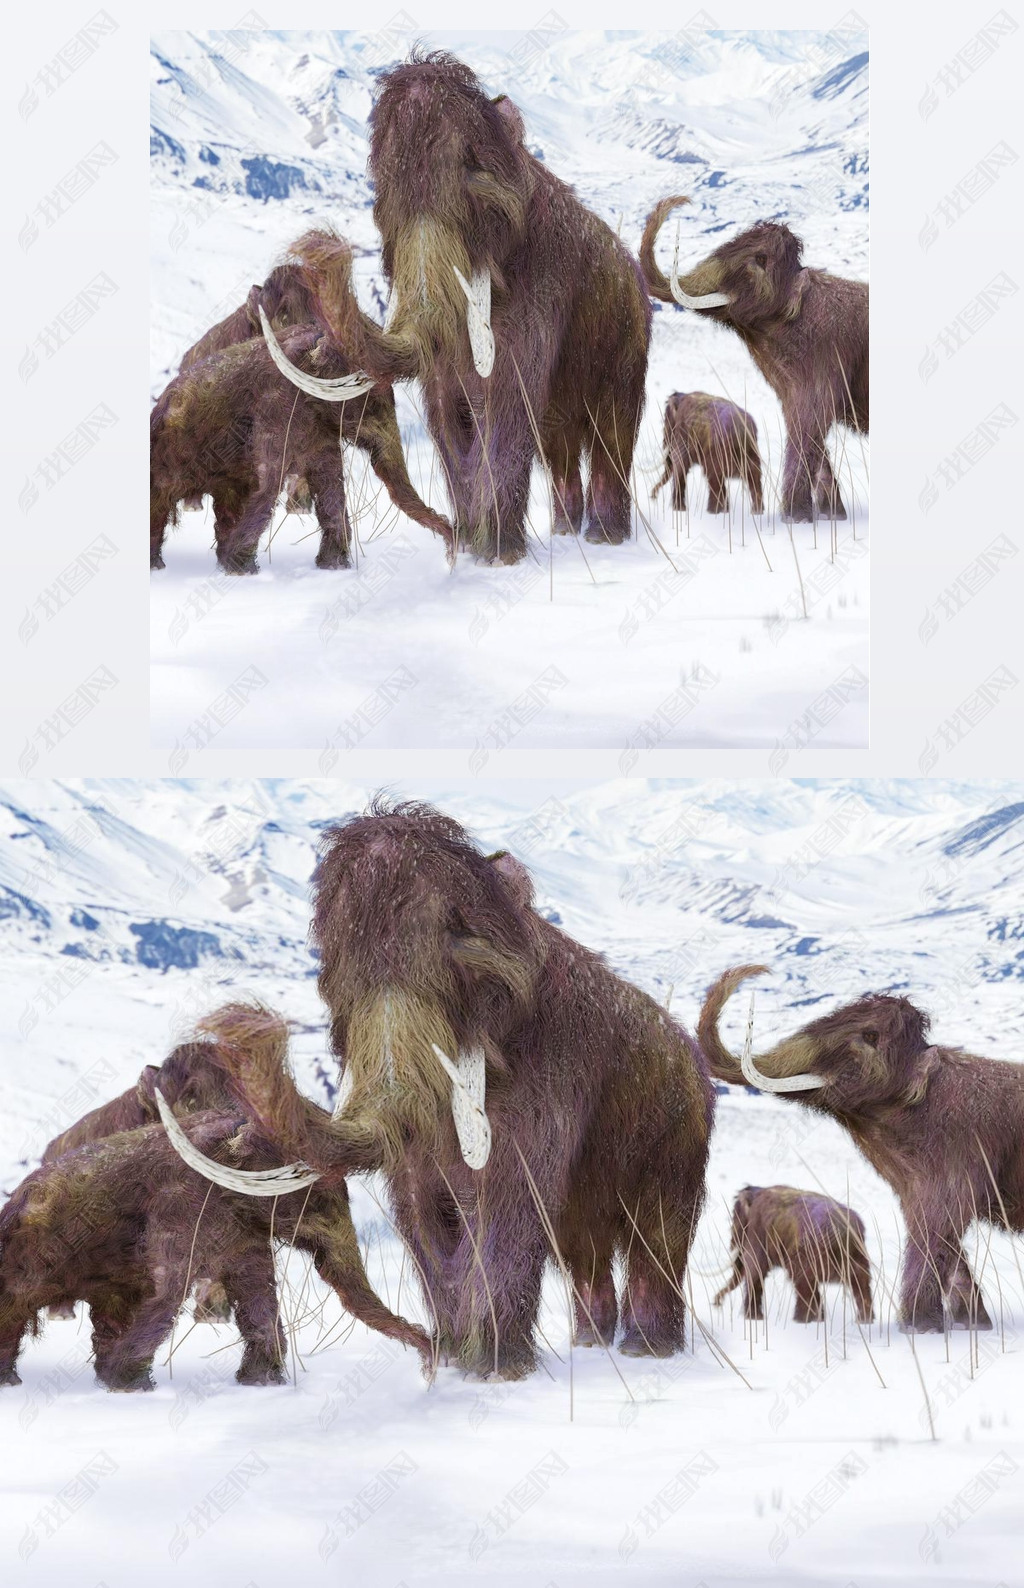 Wooly Mammoth Ice Age Scene